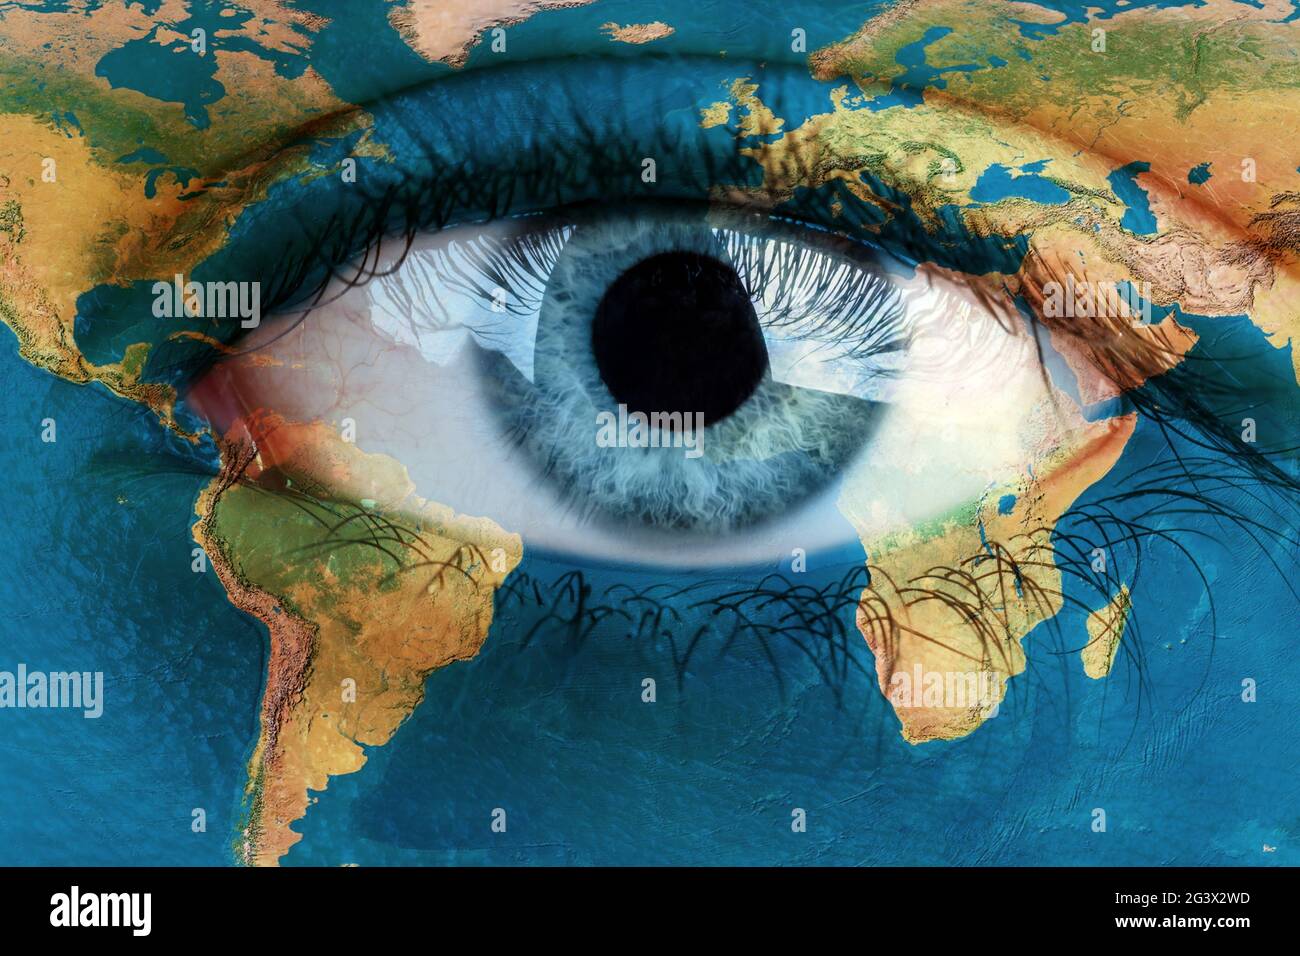 Earth continents painted on face concept Stock Photo